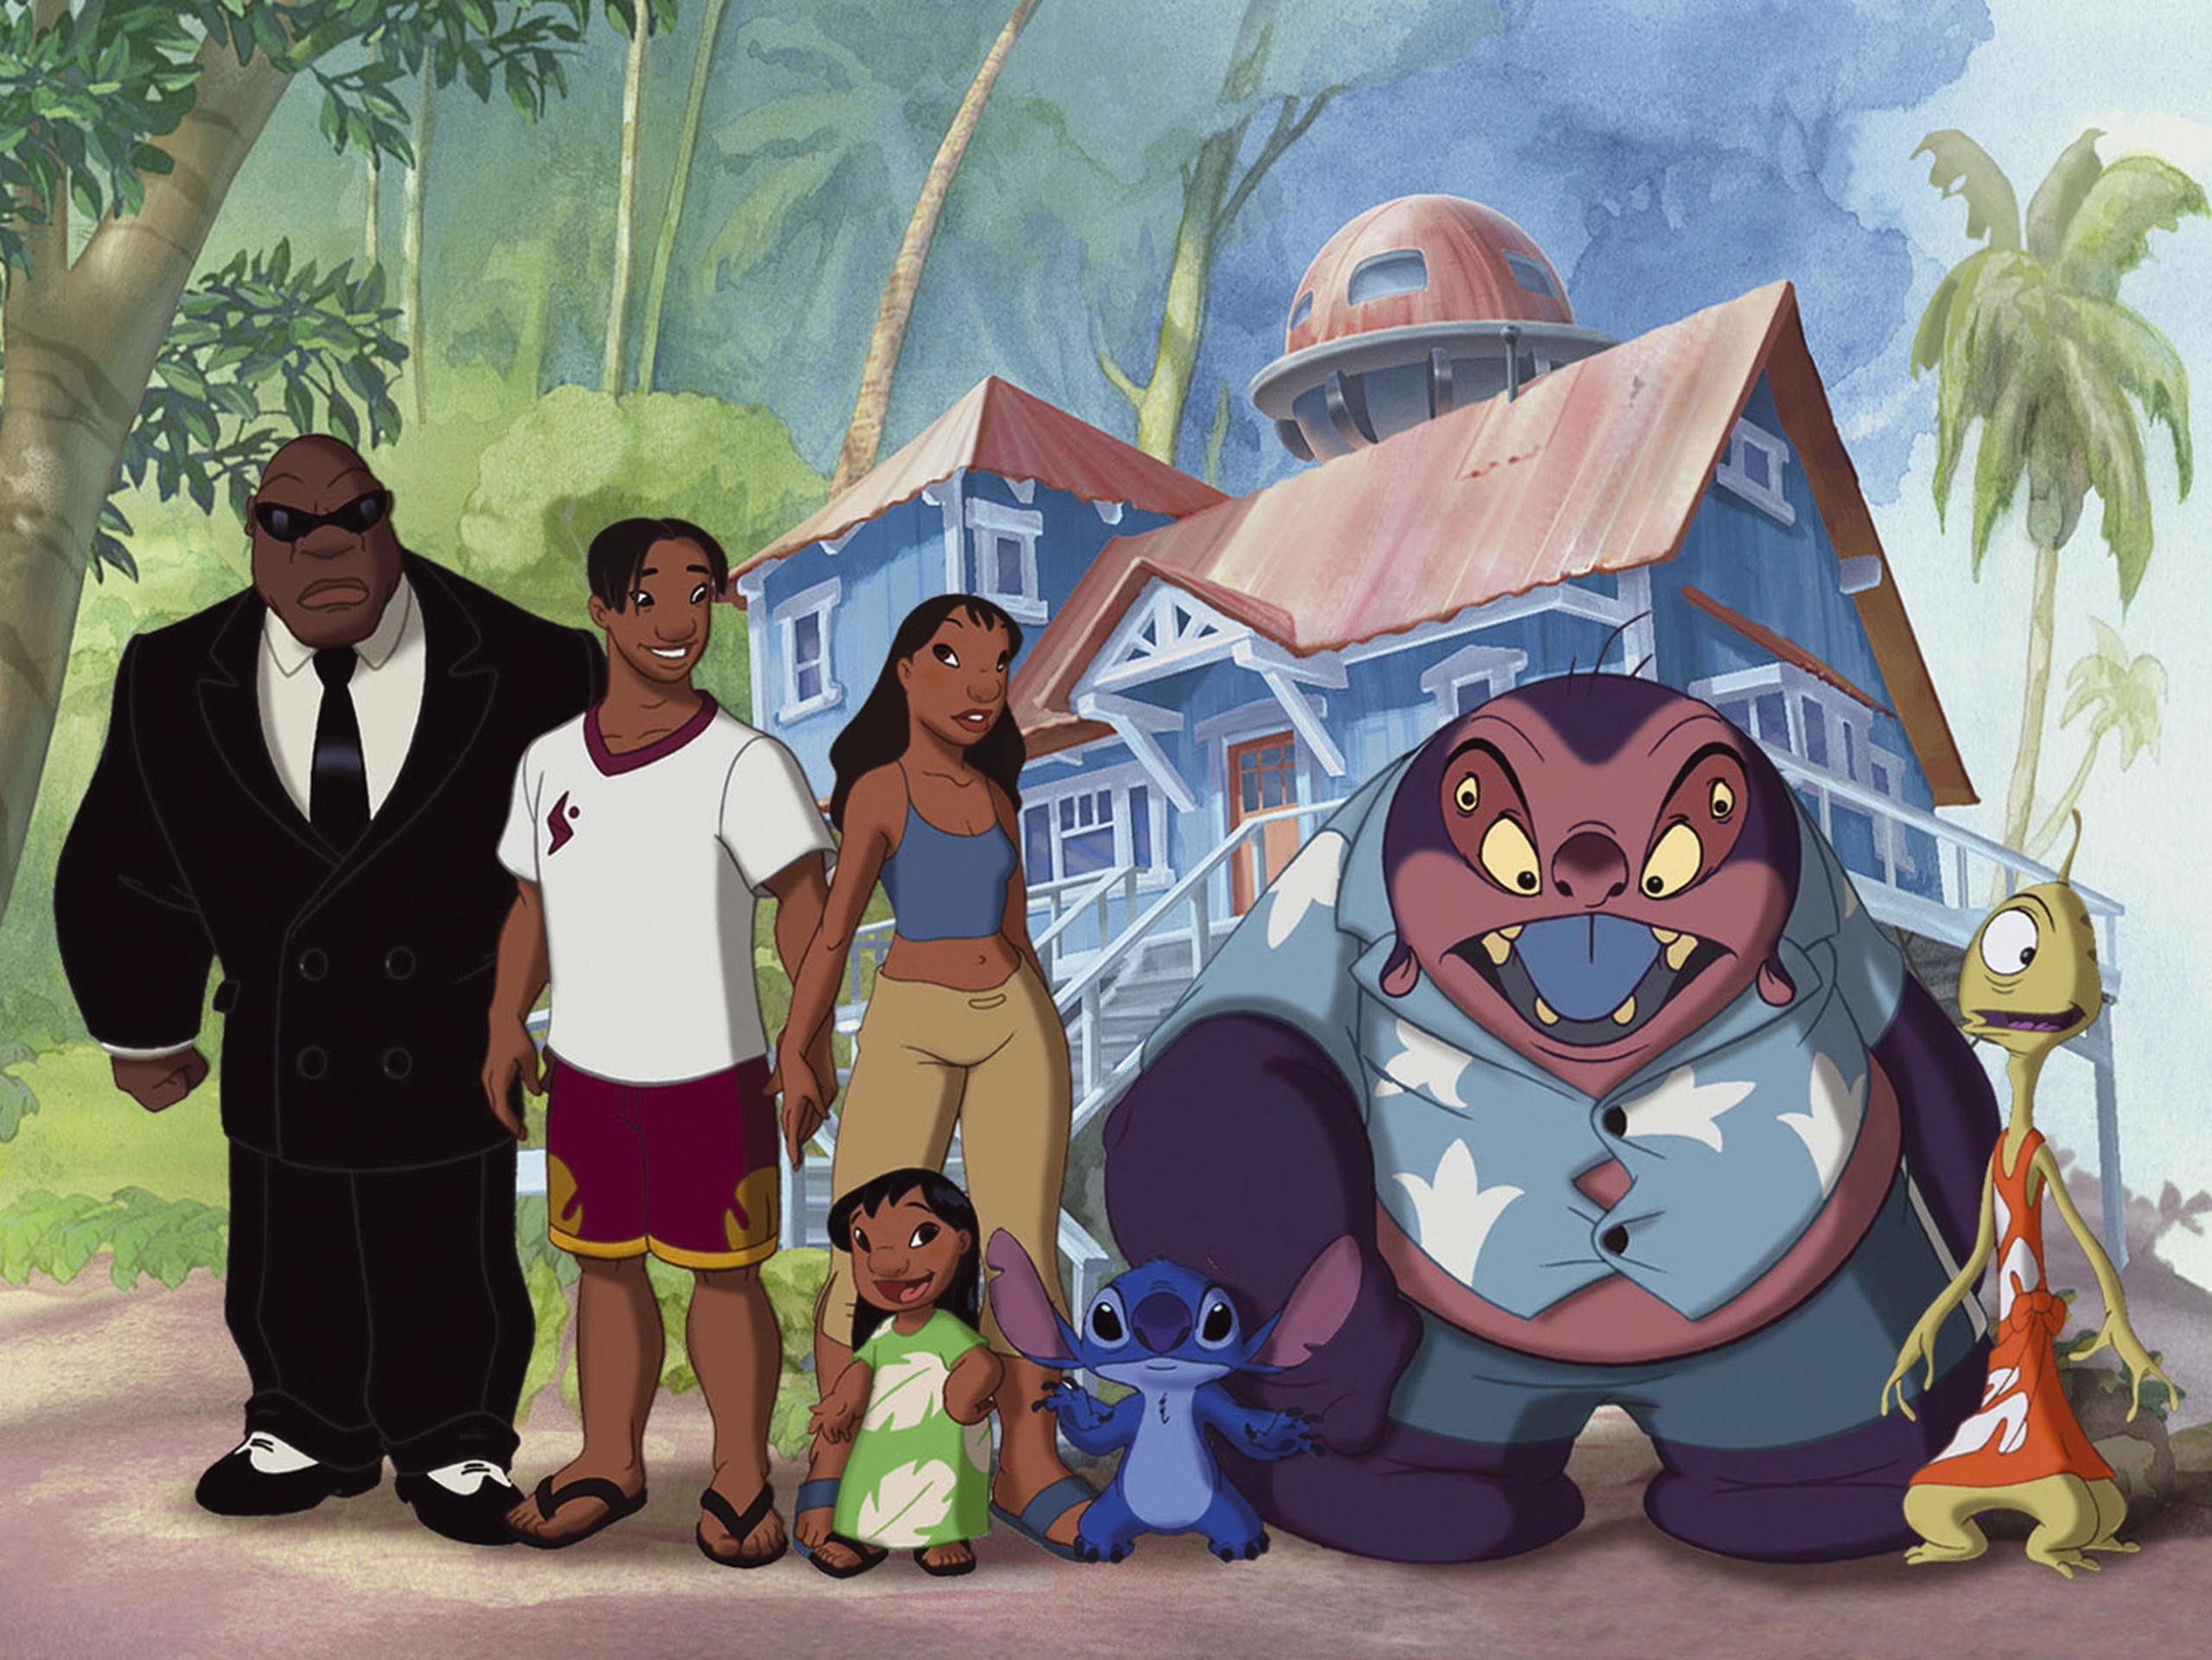 Lilo and Stitch: The Series, Lilo's wallpapers, Ethan Johnson's post, Cute and adorable, 2560x1920 HD Desktop